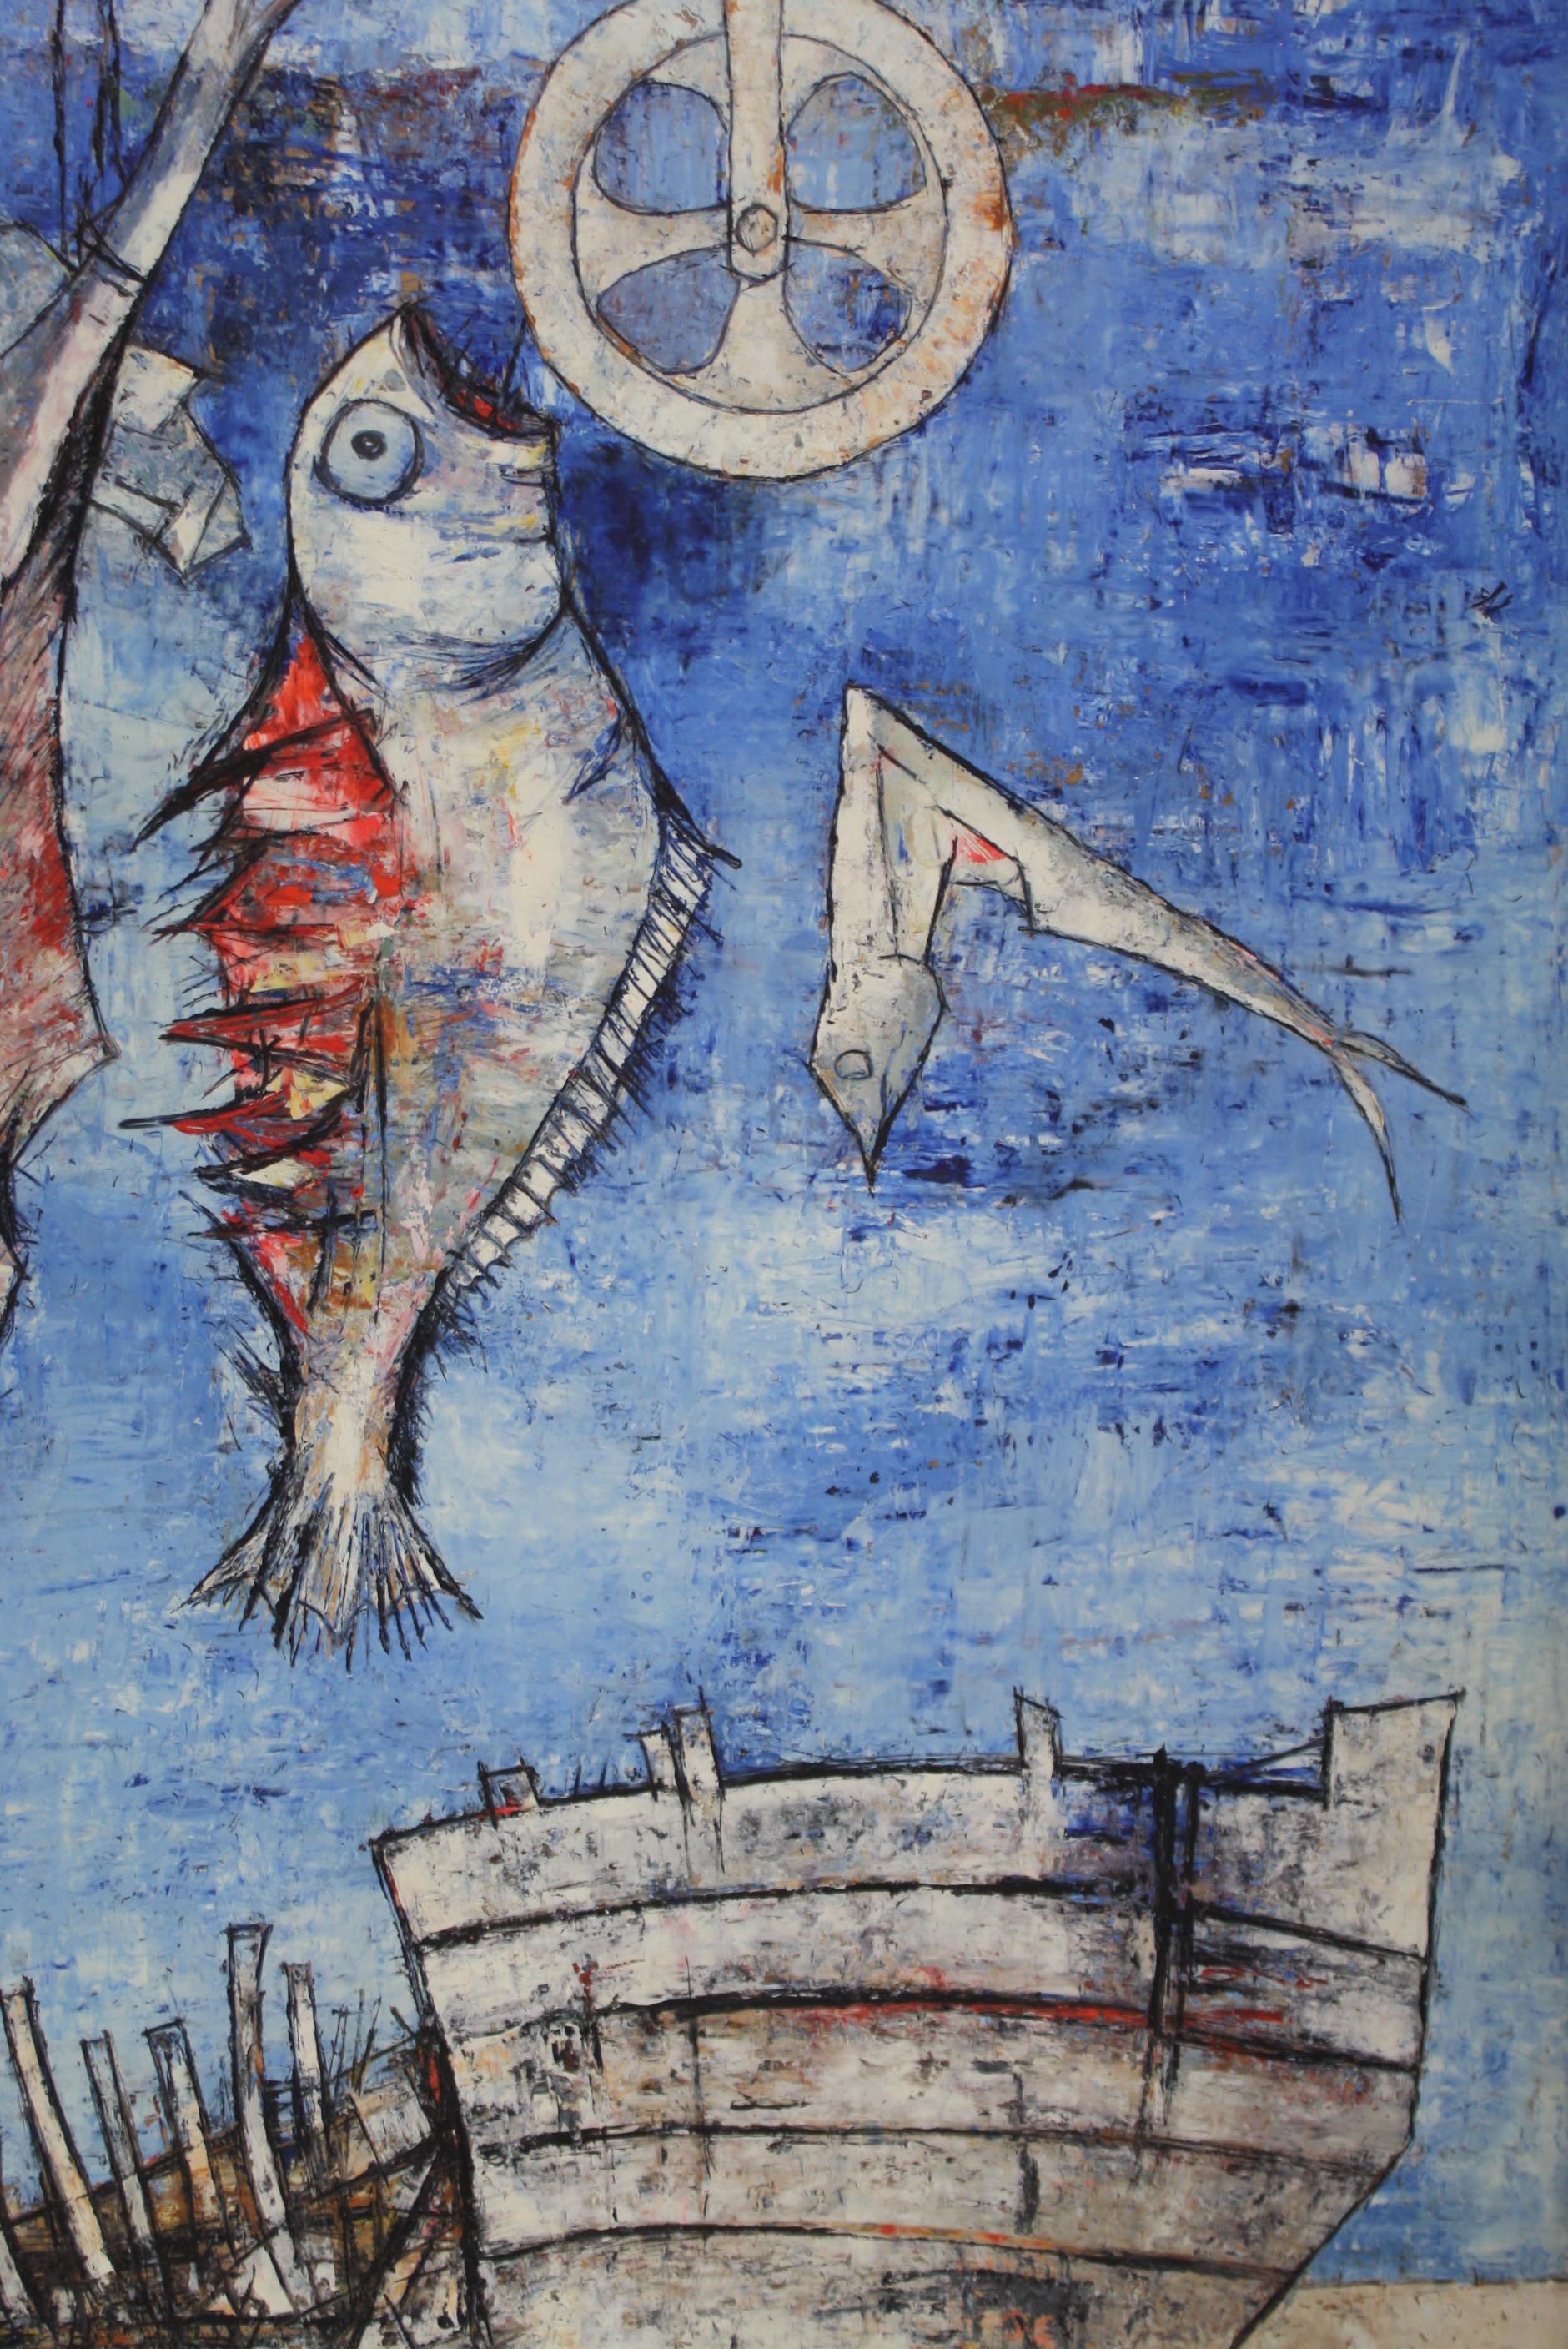 French Catch of the Day Blue Vision of a Destroyed Ship on the Sand with Fishes Hanging For Sale